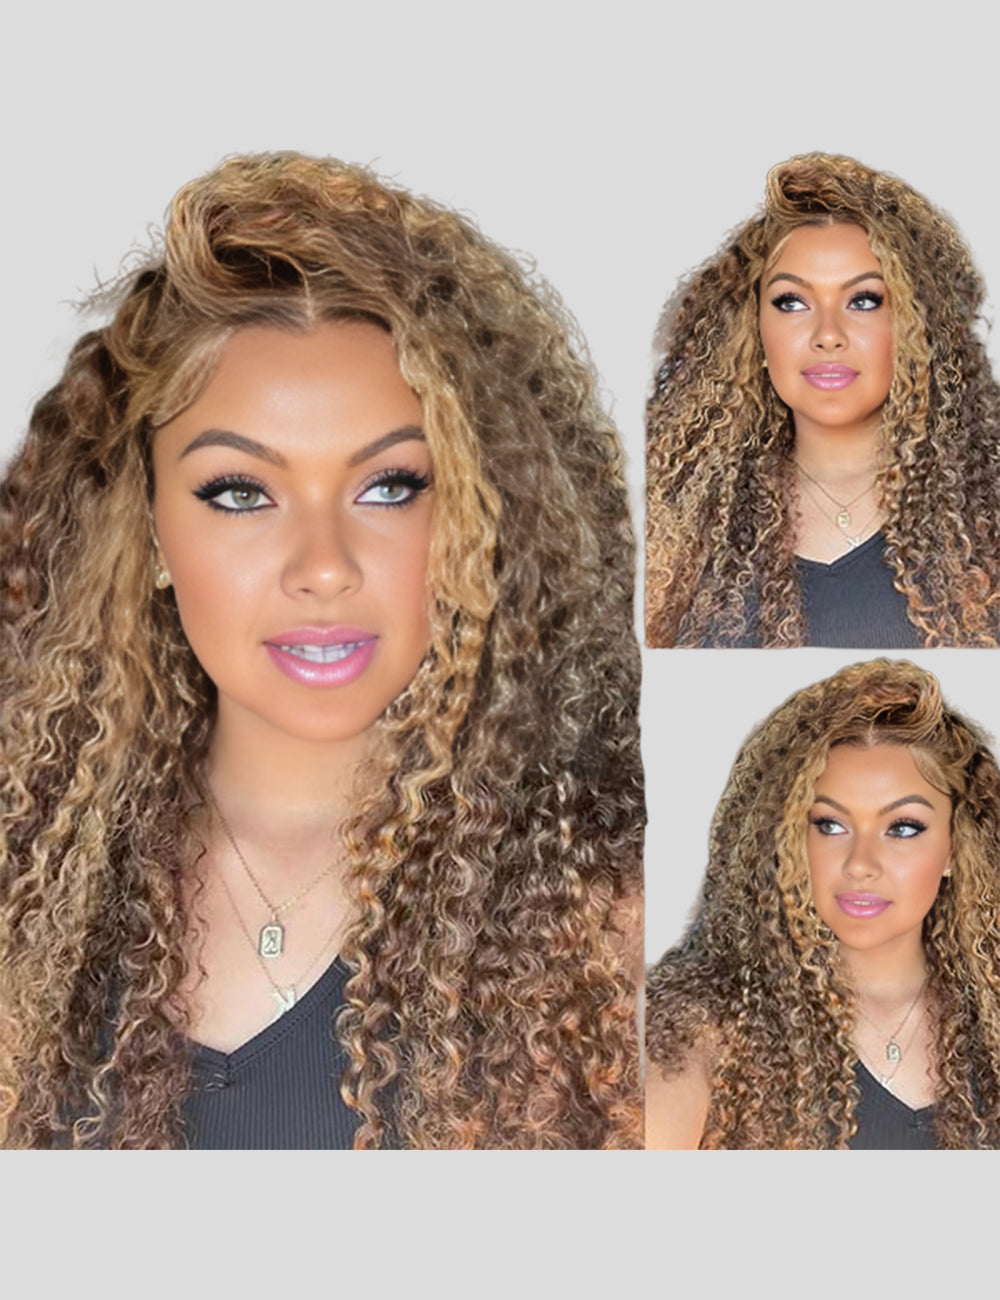 Balayage Highlight Lace Front Wigs Deep Wave Lace Frontal Wigs Pre Plucked Human Hair Wigs